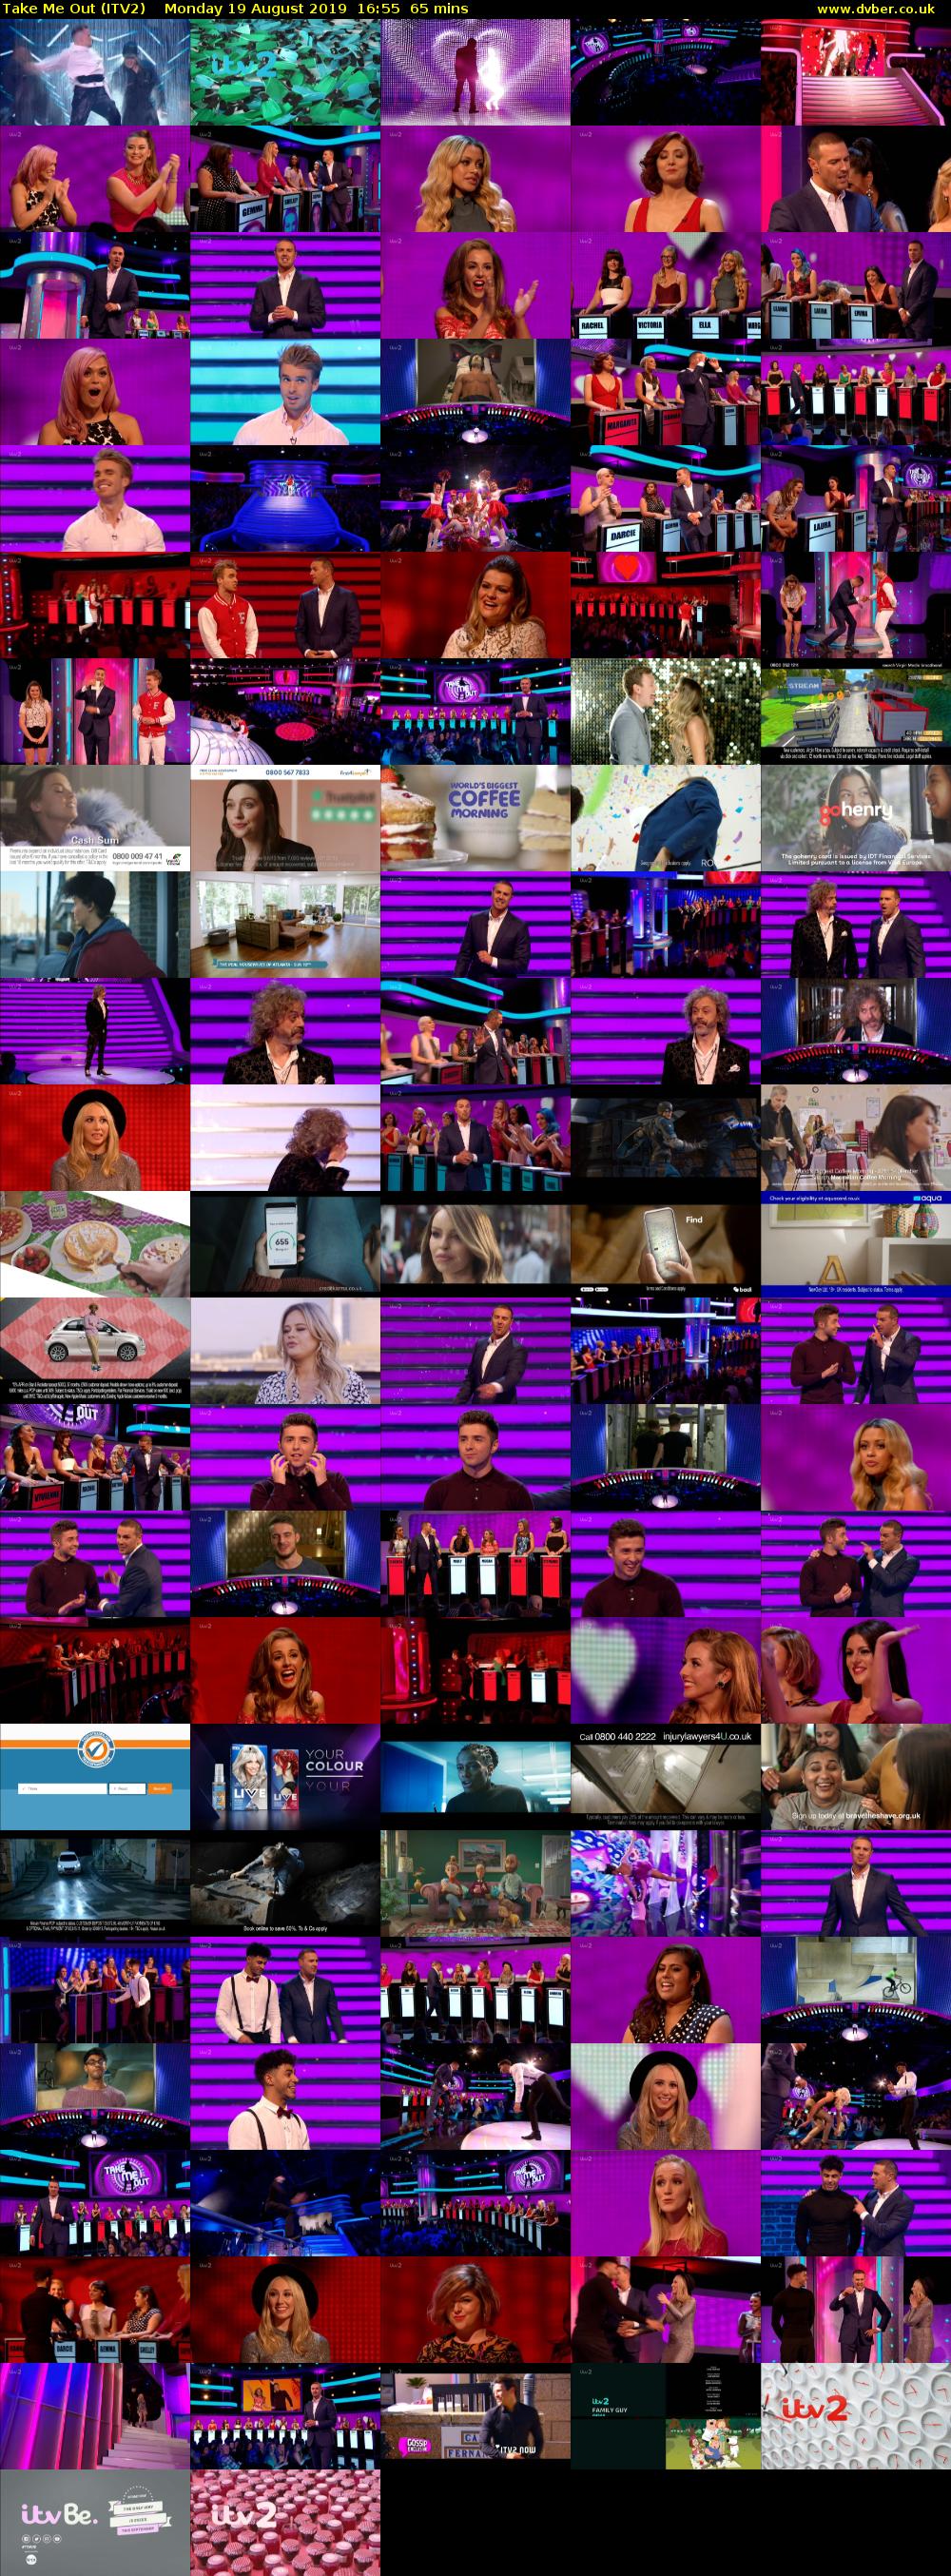 Take Me Out (ITV2) Monday 19 August 2019 16:55 - 18:00